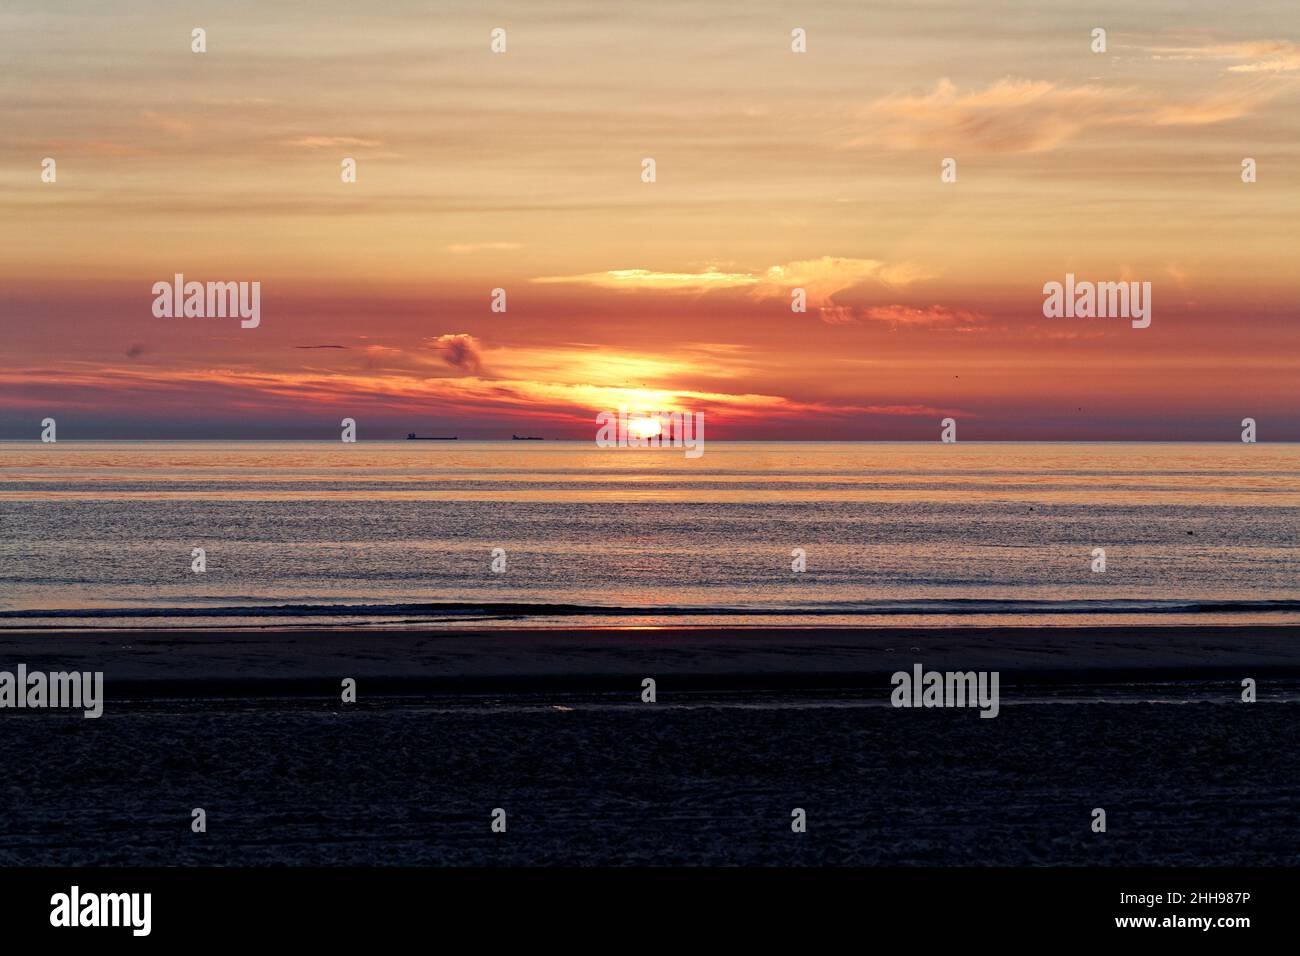 Beautiful sunset landscape in the North Sea. Texel, Netherlands View from the boats over the North Sea. Stock Photo